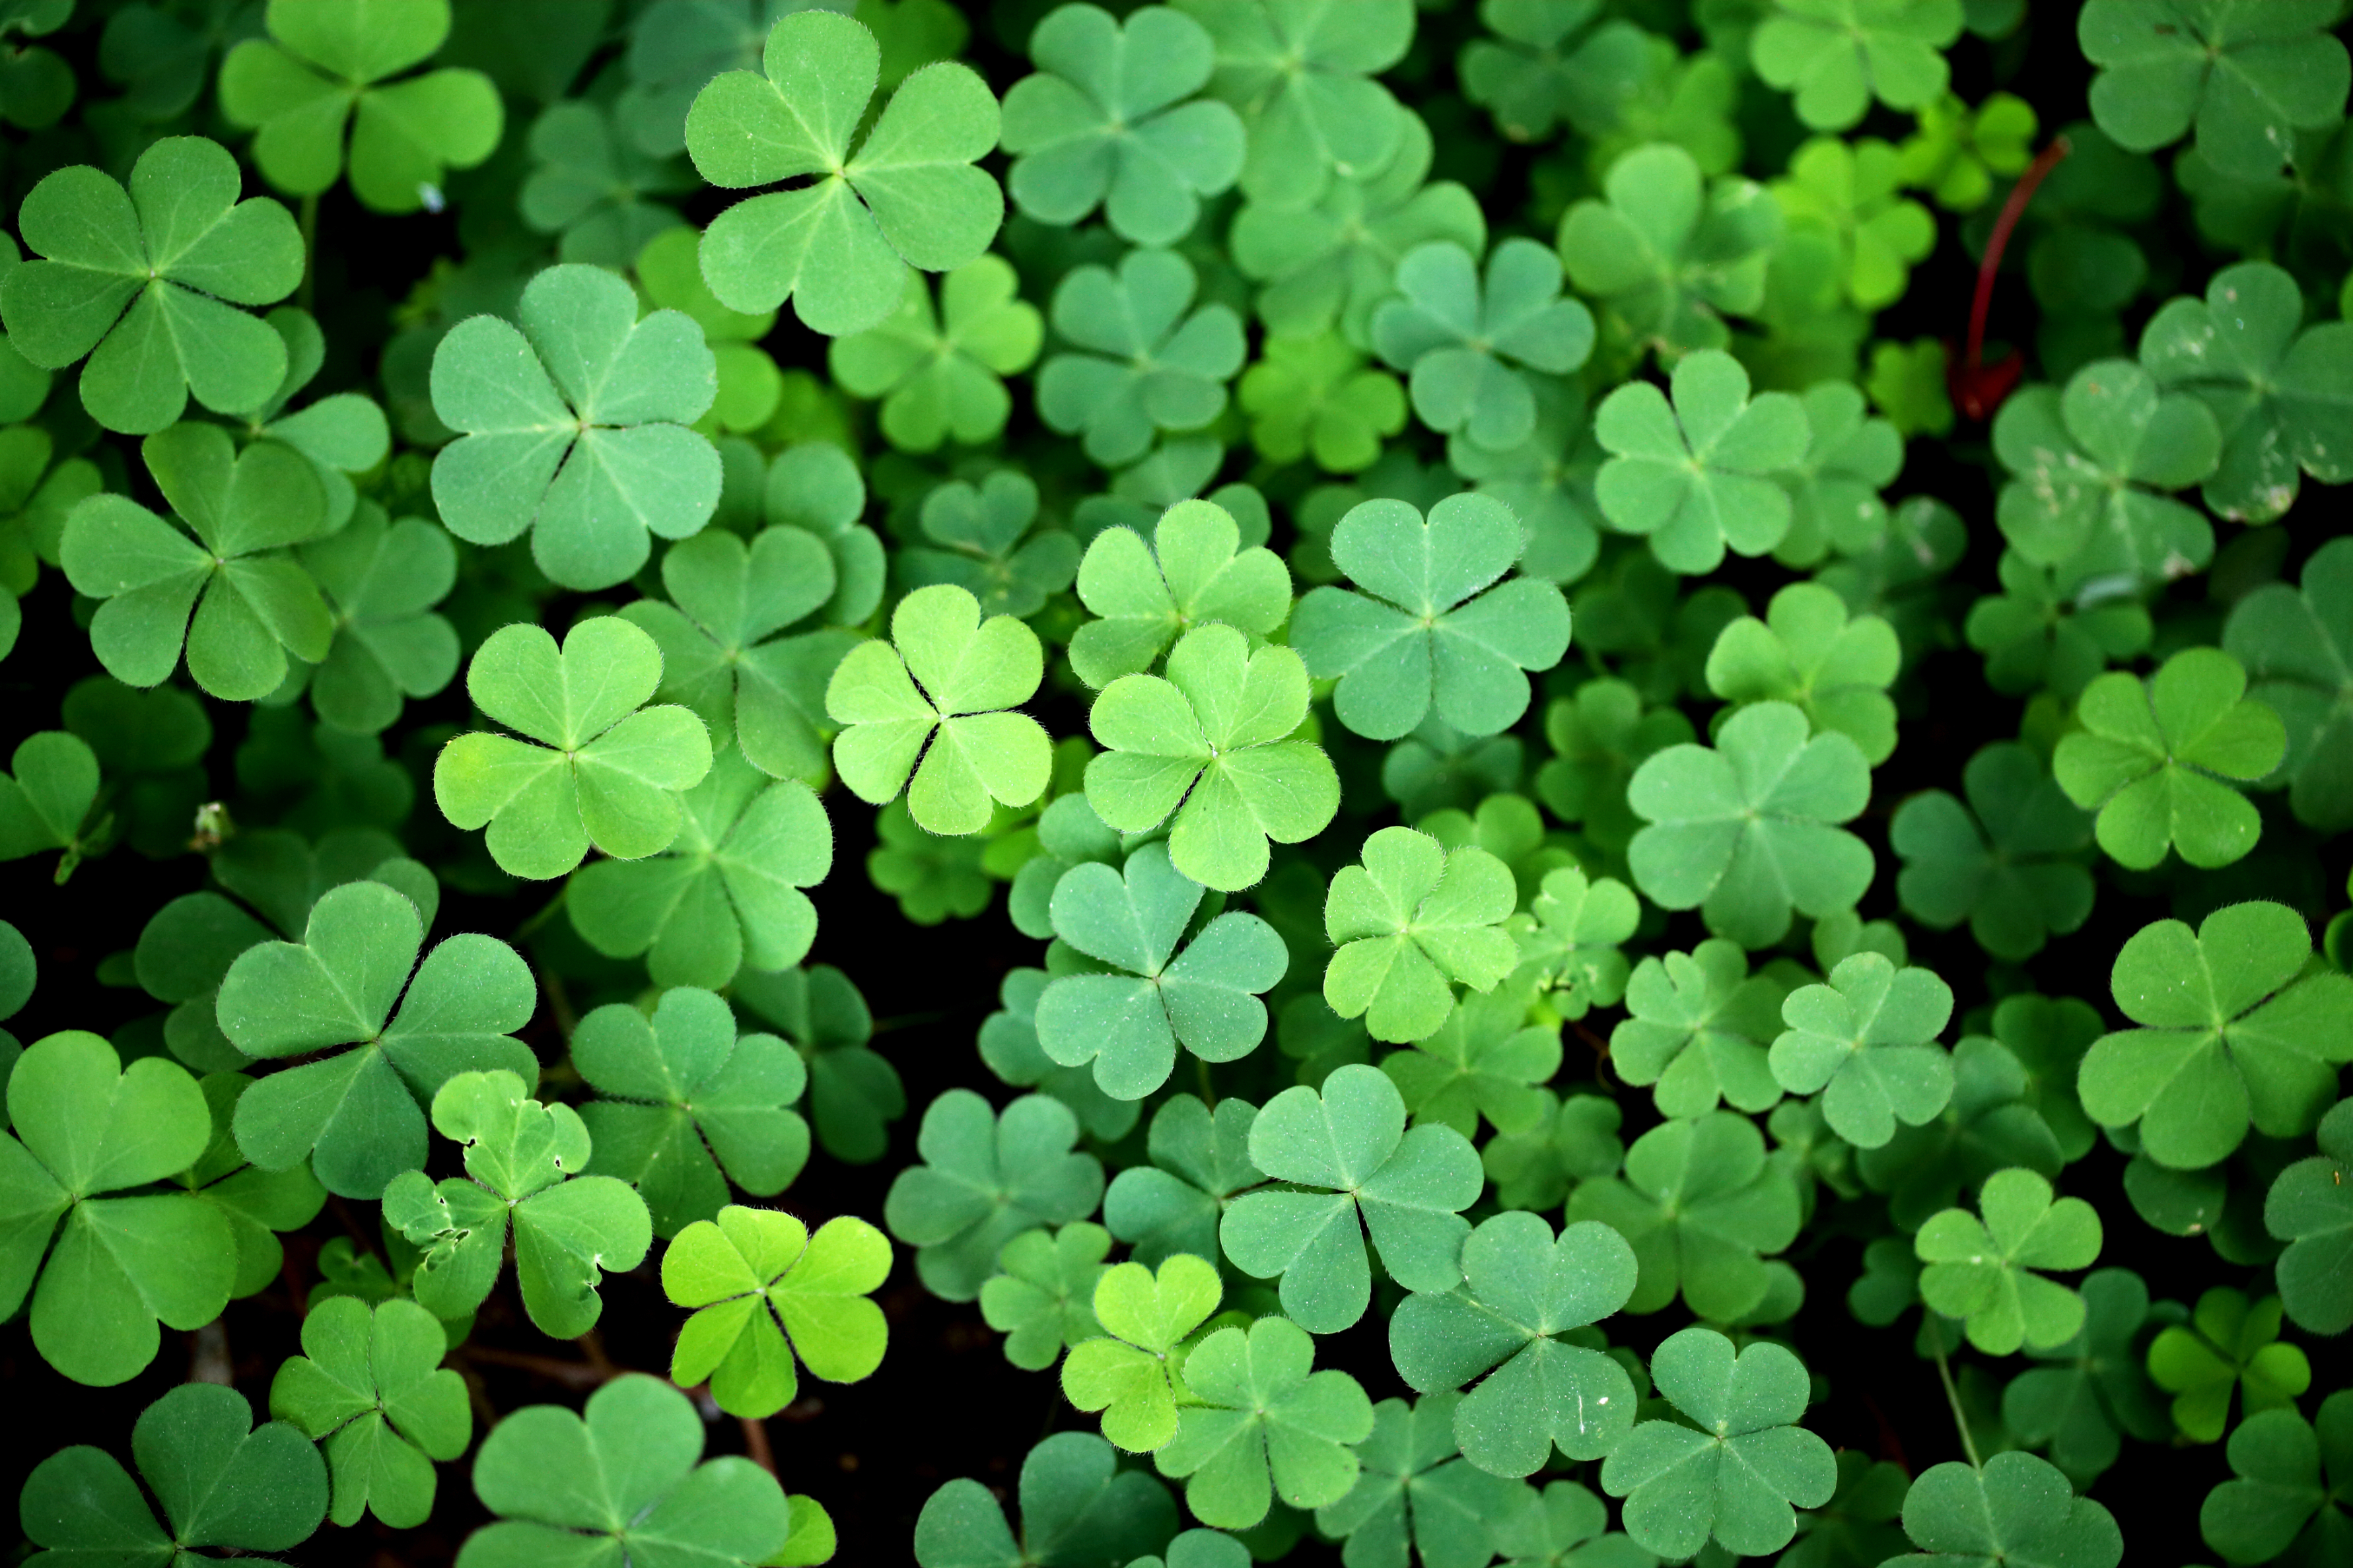 A close-up view of a dense cluster of three-leaf clovers